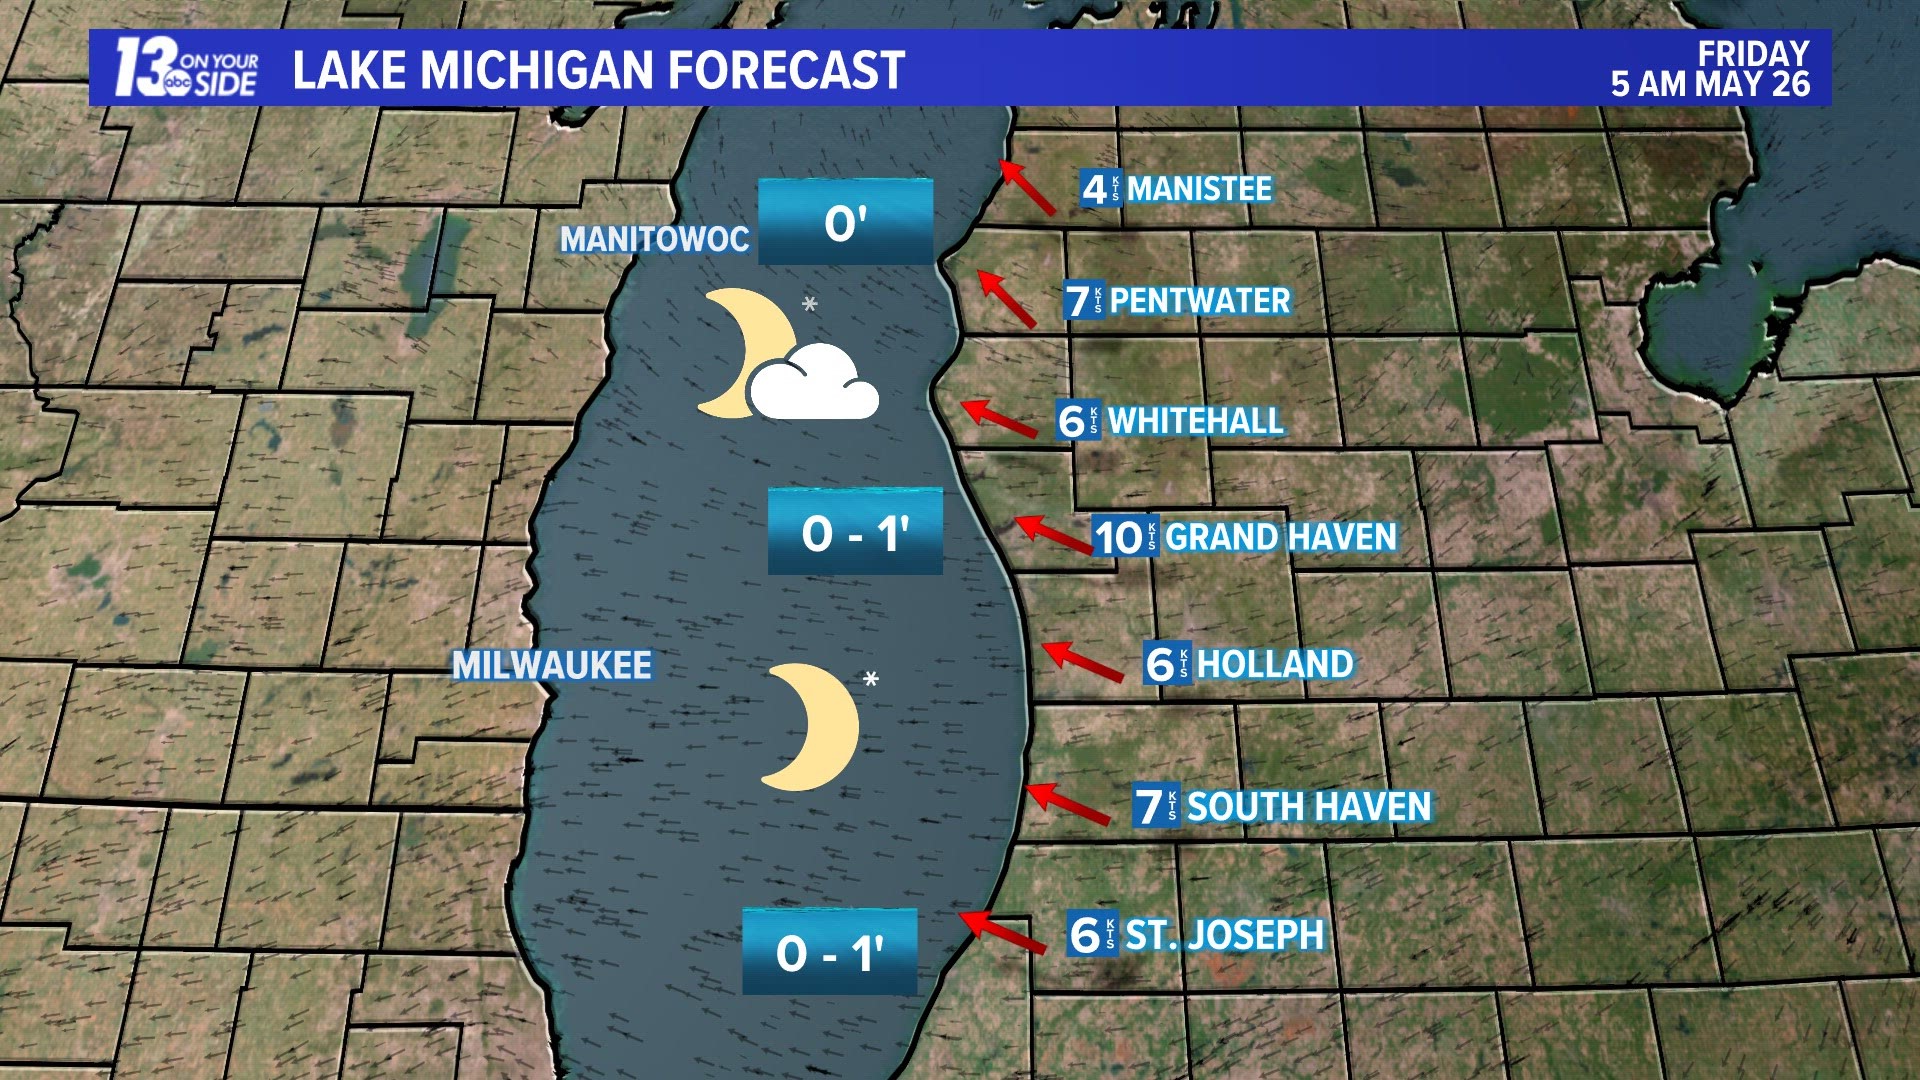 This is a sample of a Lake Michigan wind and wave forecast.